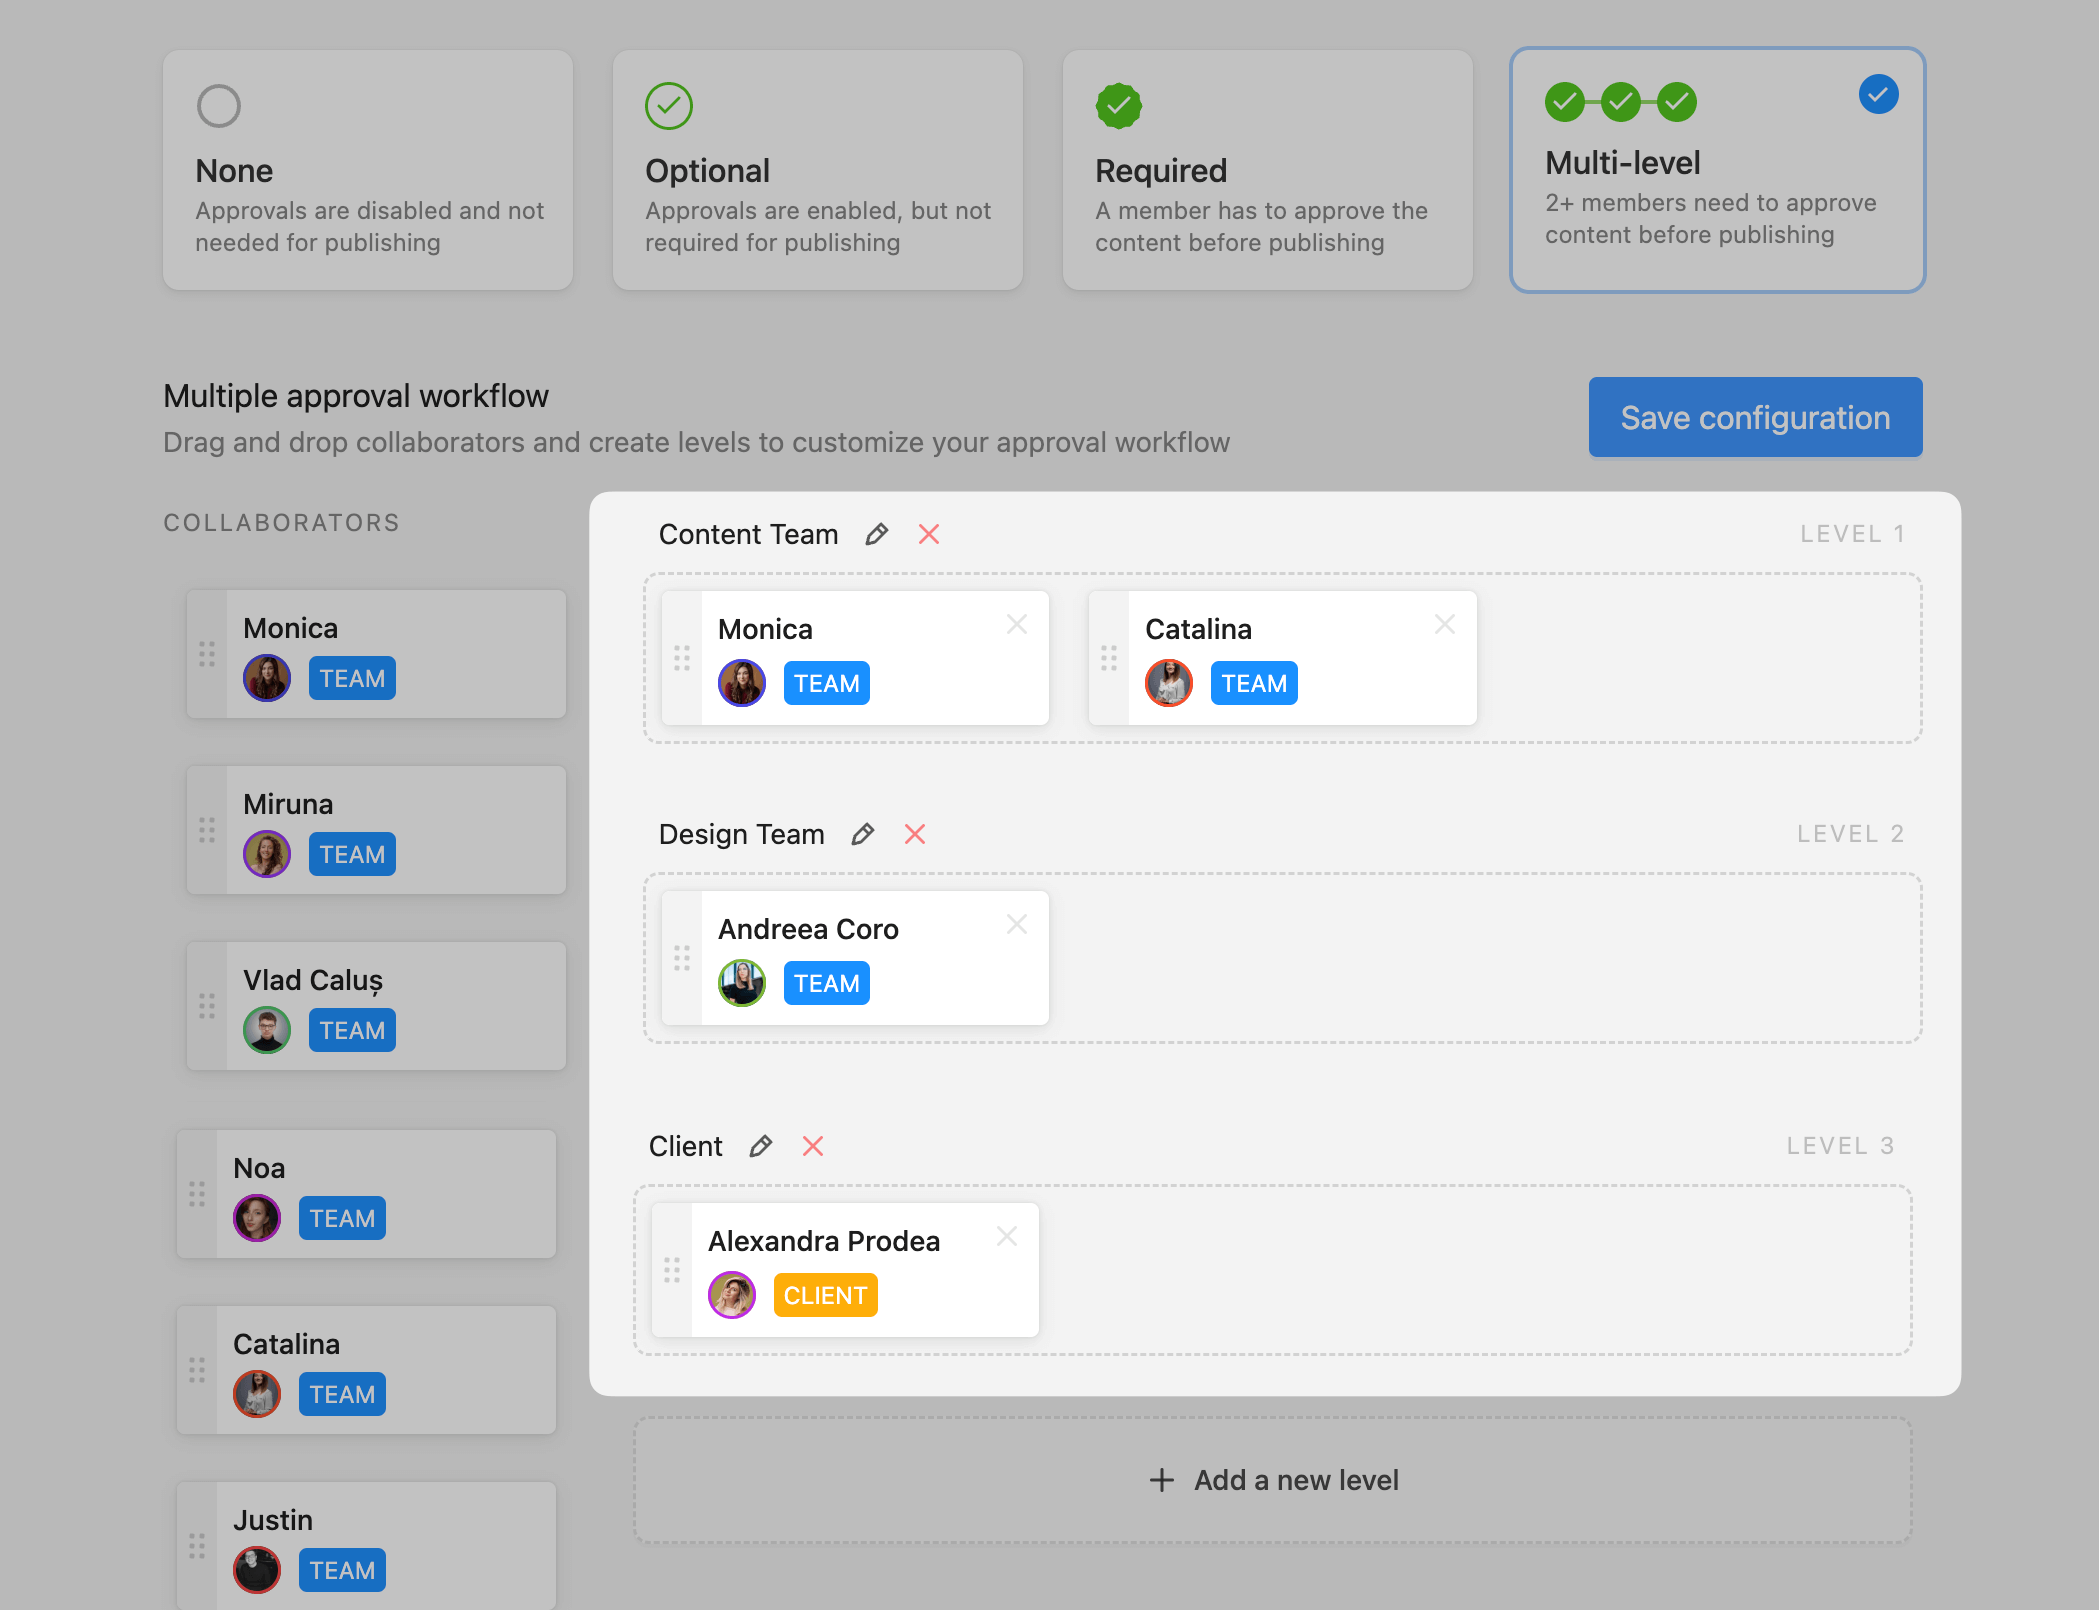 Approval settings showing multiple approval layers for content team, design team and client.